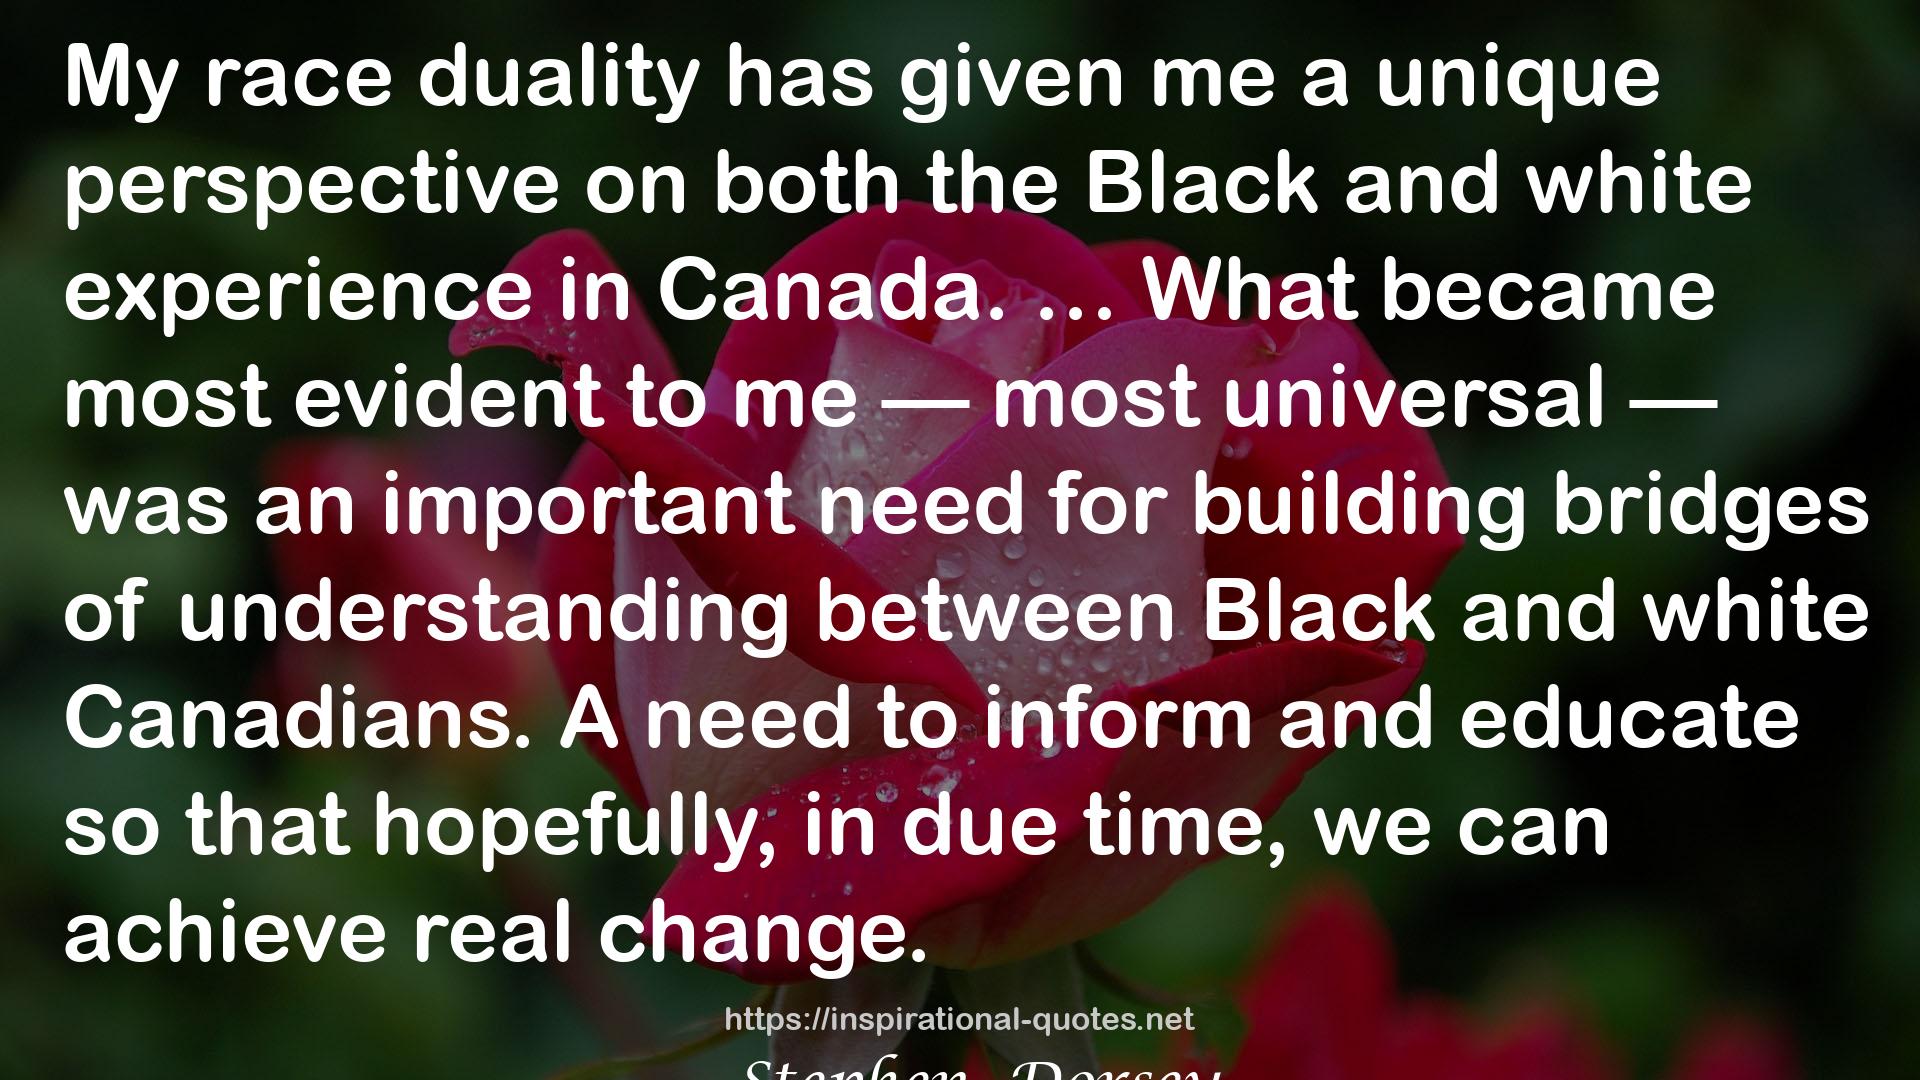 Black and White: An Intimate, Multicultural Perspective on "White Advantage" and the Paths to Change QUOTES